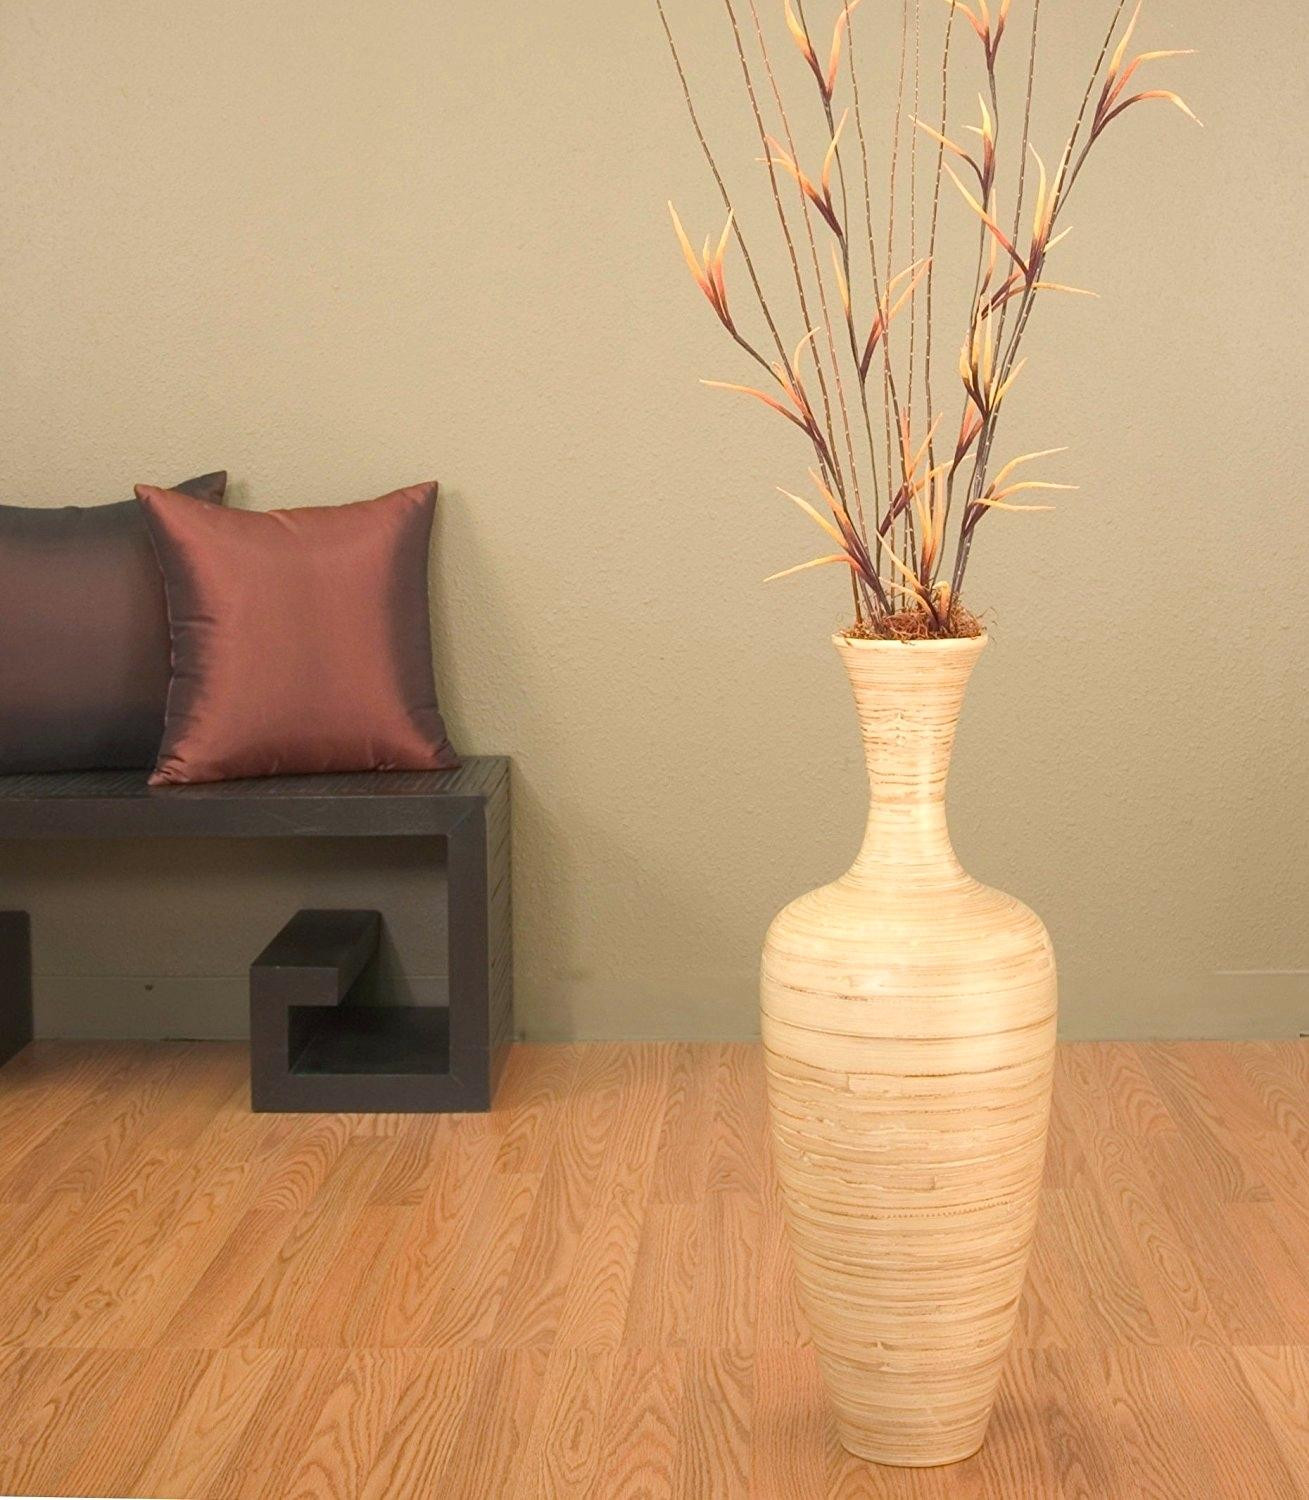 14 Unique Buy Floor Vase 2024 free download buy floor vase of large floor vase vases set of 3 for cheap with artificial flowers with large floor vase plnts ccesories tll decortive vases for sale cheap fillers large floor vase